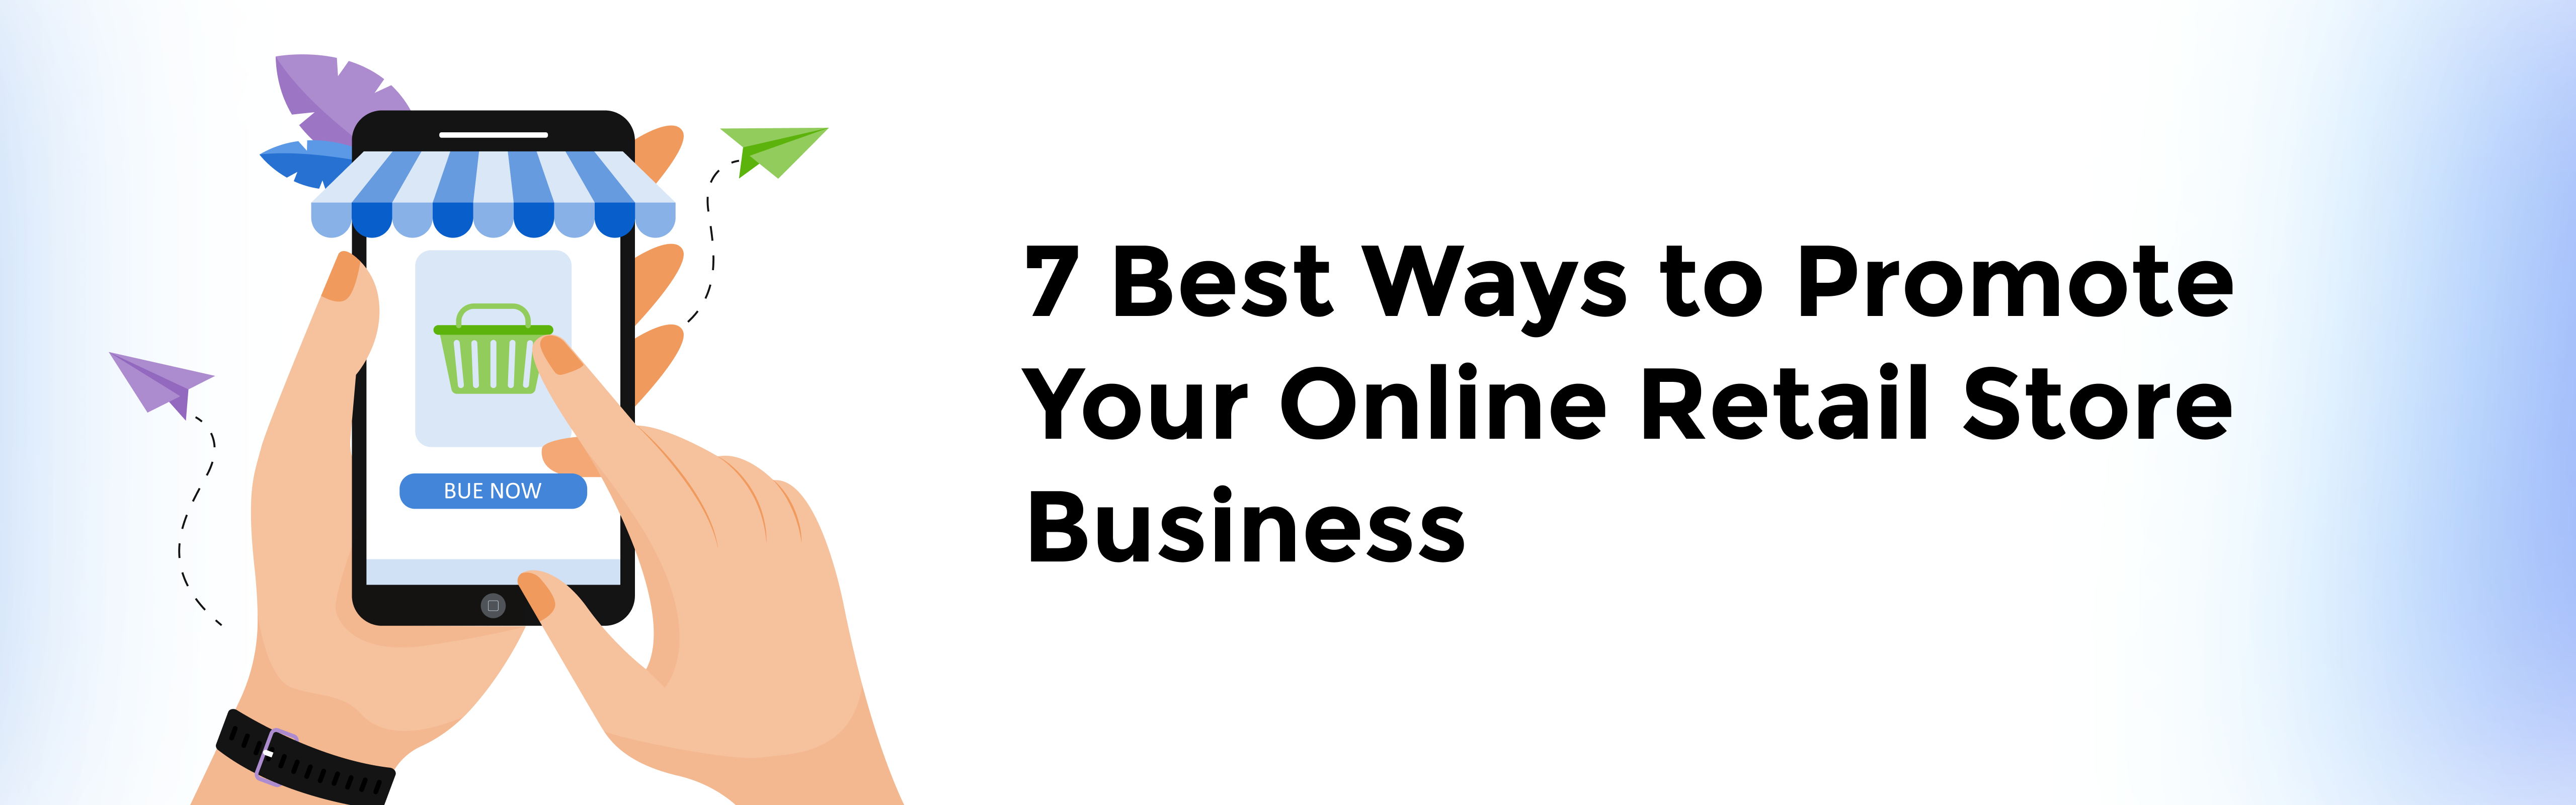 ways-to-promote-your-online-retail-business